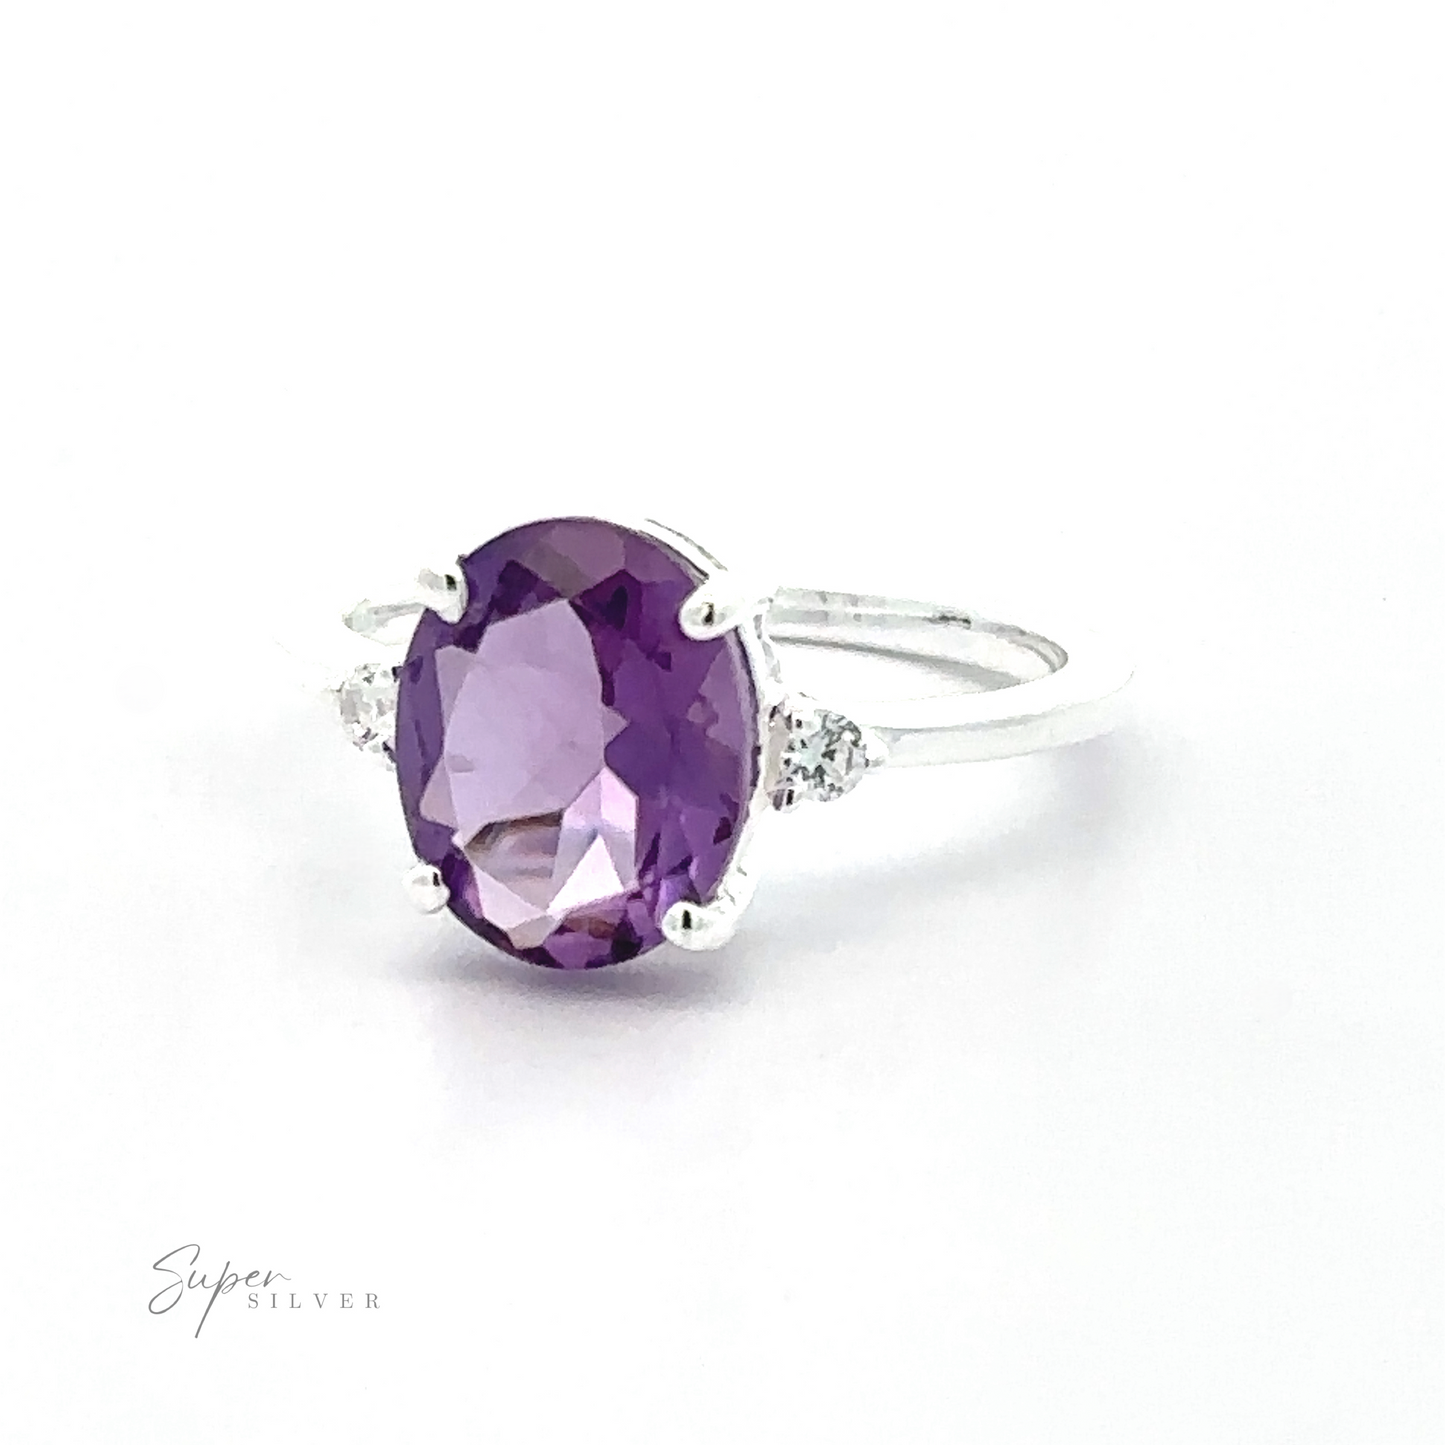 
                  
                    Brilliant Pronged Oval Gemstone Ring featuring a large brilliant oval purple gemstone in a prong setting, flanked by two smaller clear crystals, displayed on a white background.
                  
                